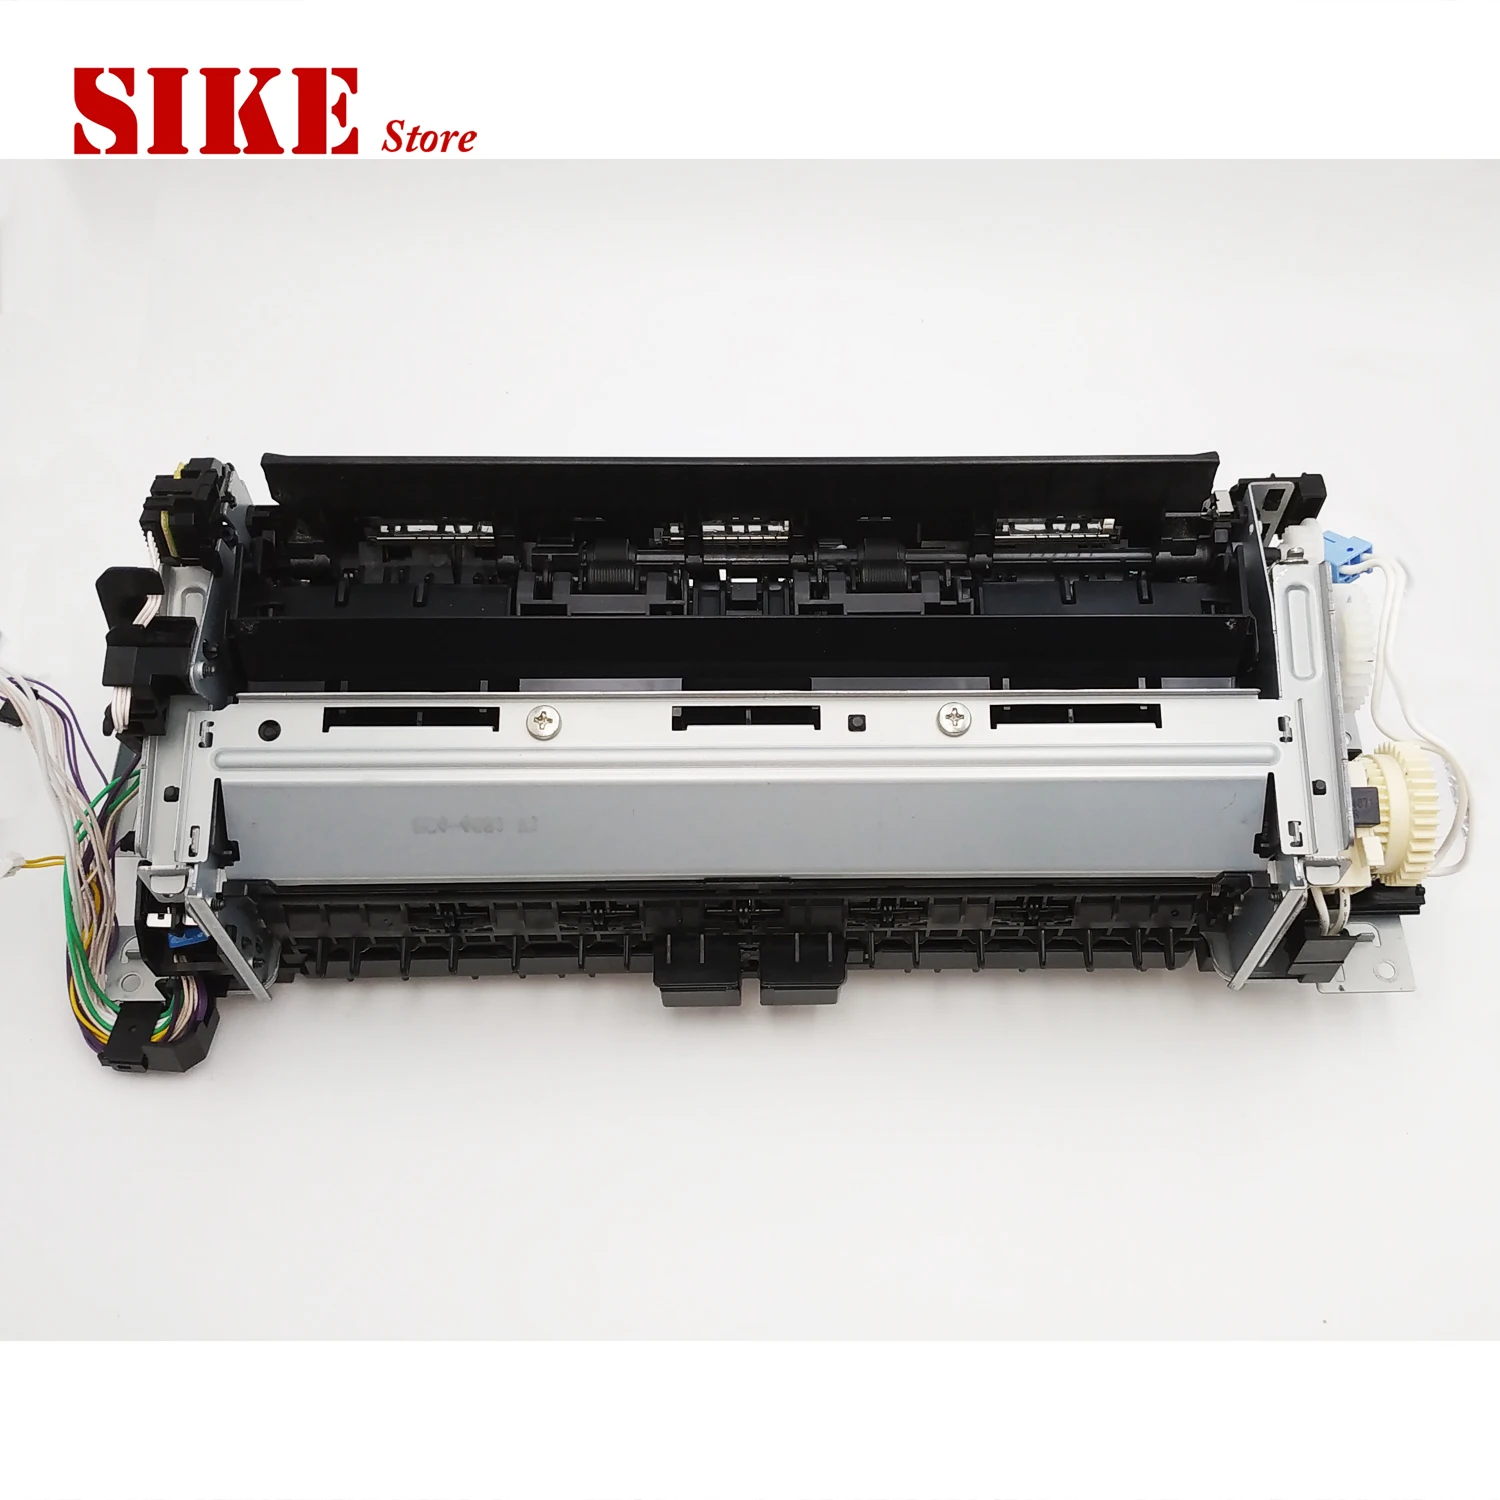 Rm2-6435 Rm2-6418 Fixing Assy For Canon Mf731cdw Mf732cdw Mf733cdw Mf735cdw  Mf735cx Mf731 Mf732 Mf735 Mf733 Fuser Assembly Unit - Printer Parts -  AliExpress